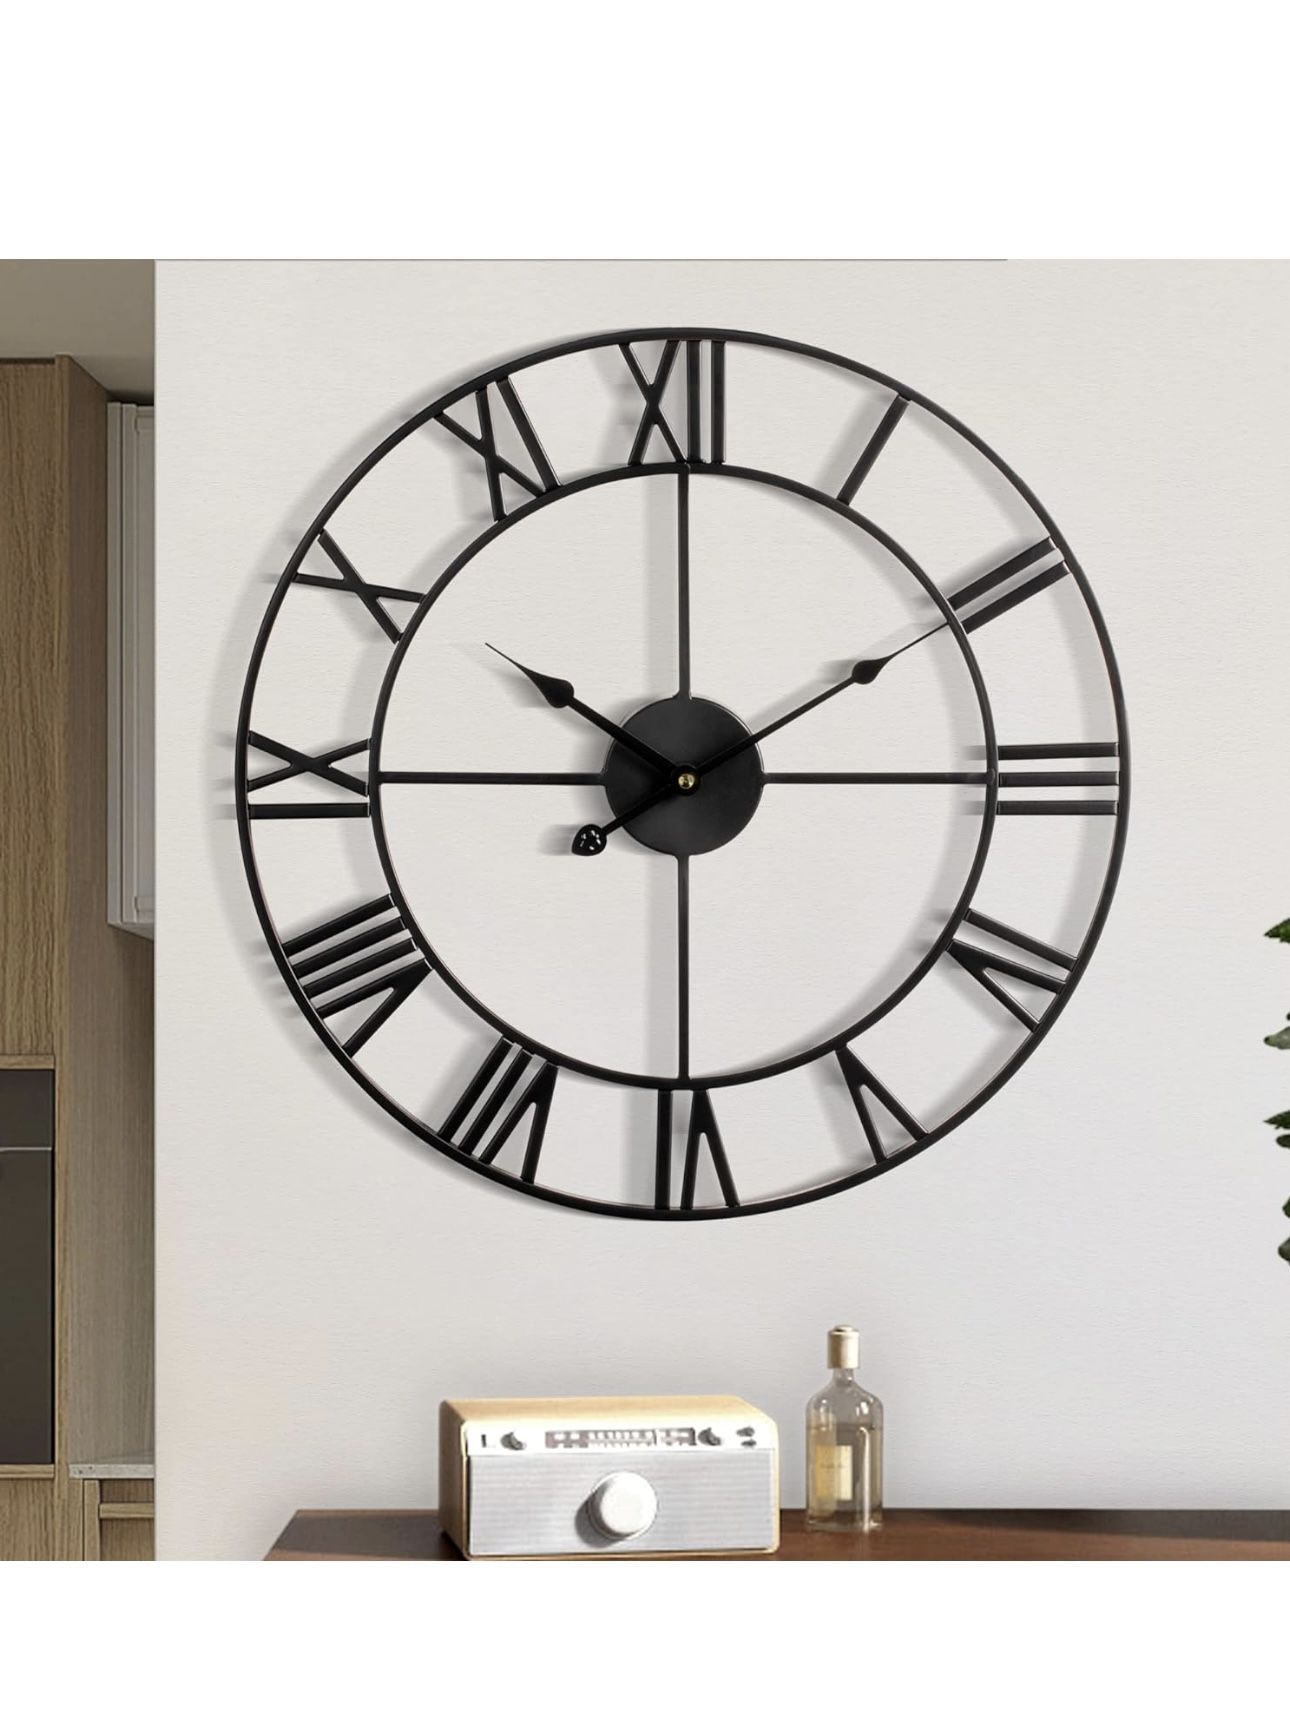 Large Wall Clock, Metal Retro Roman Numeral Clock, Modern Round Silent Wall Clocks, Easy to Read for Living Room/Home/Kitchen/Bedroom/Office/School De